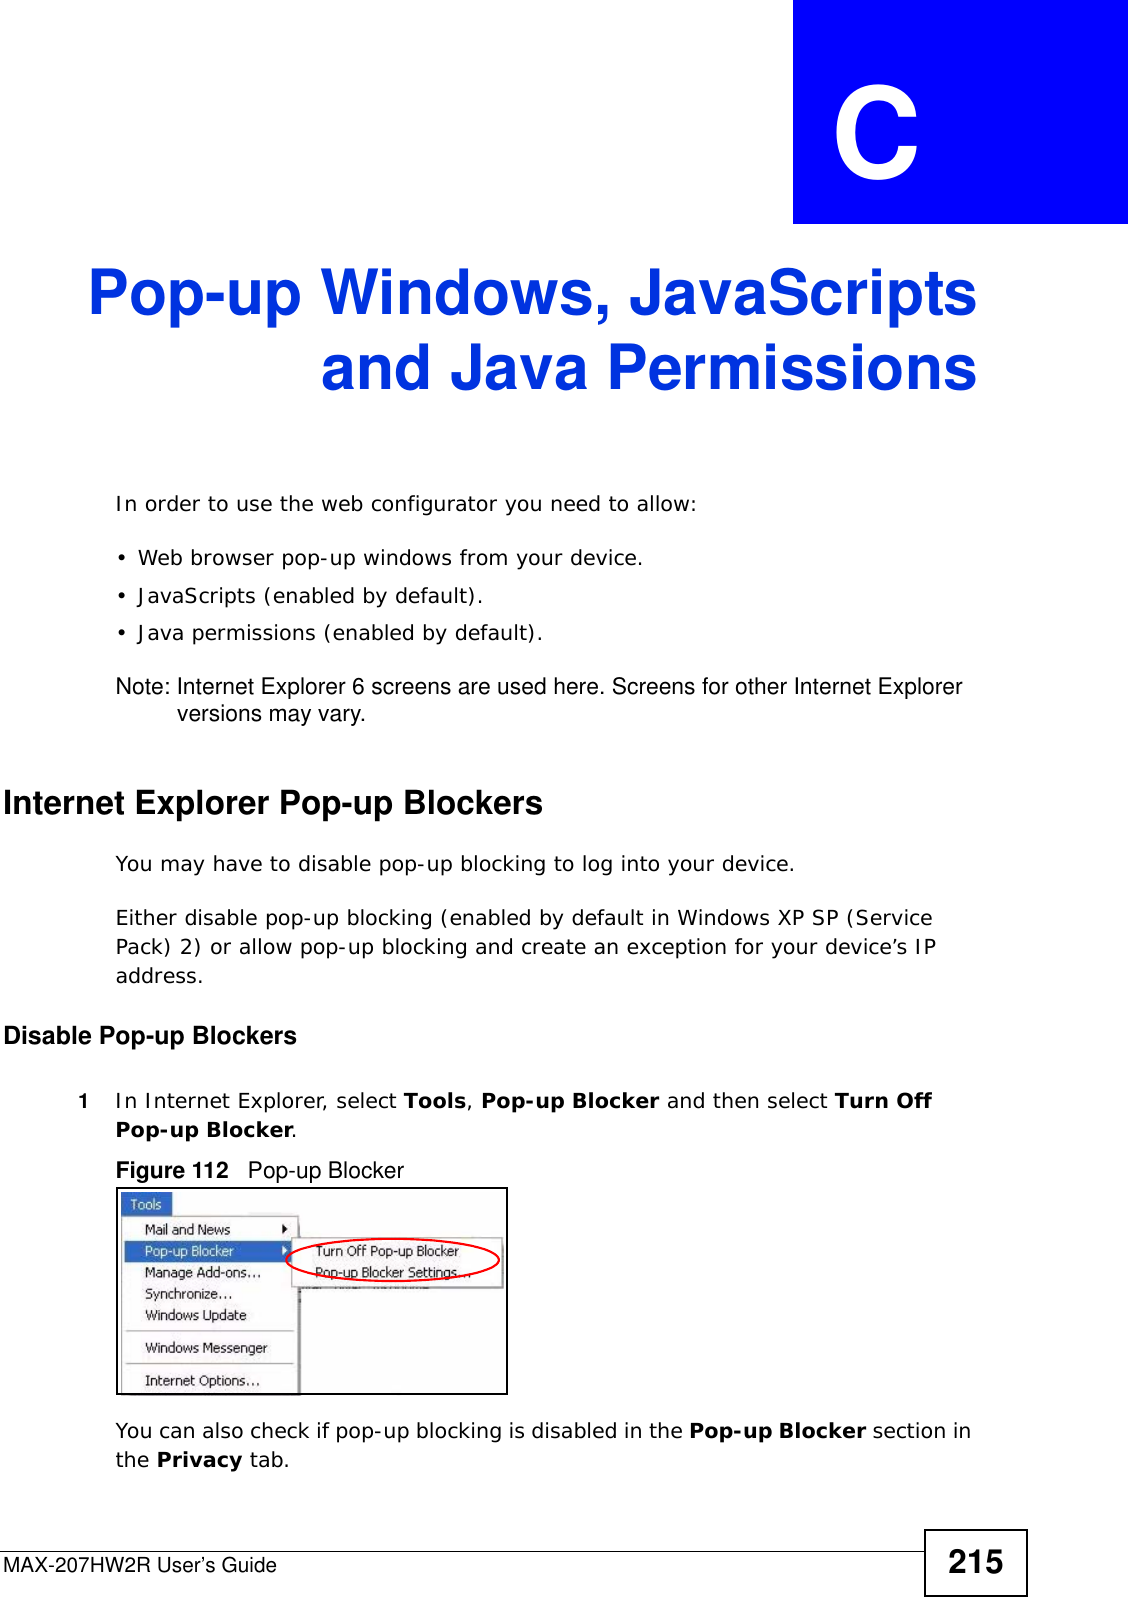 MAX-207HW2R User’s Guide 215APPENDIX  C Pop-up Windows, JavaScriptsand Java PermissionsIn order to use the web configurator you need to allow:• Web browser pop-up windows from your device.• JavaScripts (enabled by default).• Java permissions (enabled by default).Note: Internet Explorer 6 screens are used here. Screens for other Internet Explorer versions may vary.Internet Explorer Pop-up BlockersYou may have to disable pop-up blocking to log into your device. Either disable pop-up blocking (enabled by default in Windows XP SP (Service Pack) 2) or allow pop-up blocking and create an exception for your device’s IP address.Disable Pop-up Blockers1In Internet Explorer, select Tools, Pop-up Blocker and then select Turn Off Pop-up Blocker. Figure 112   Pop-up BlockerYou can also check if pop-up blocking is disabled in the Pop-up Blocker section in the Privacy tab. 